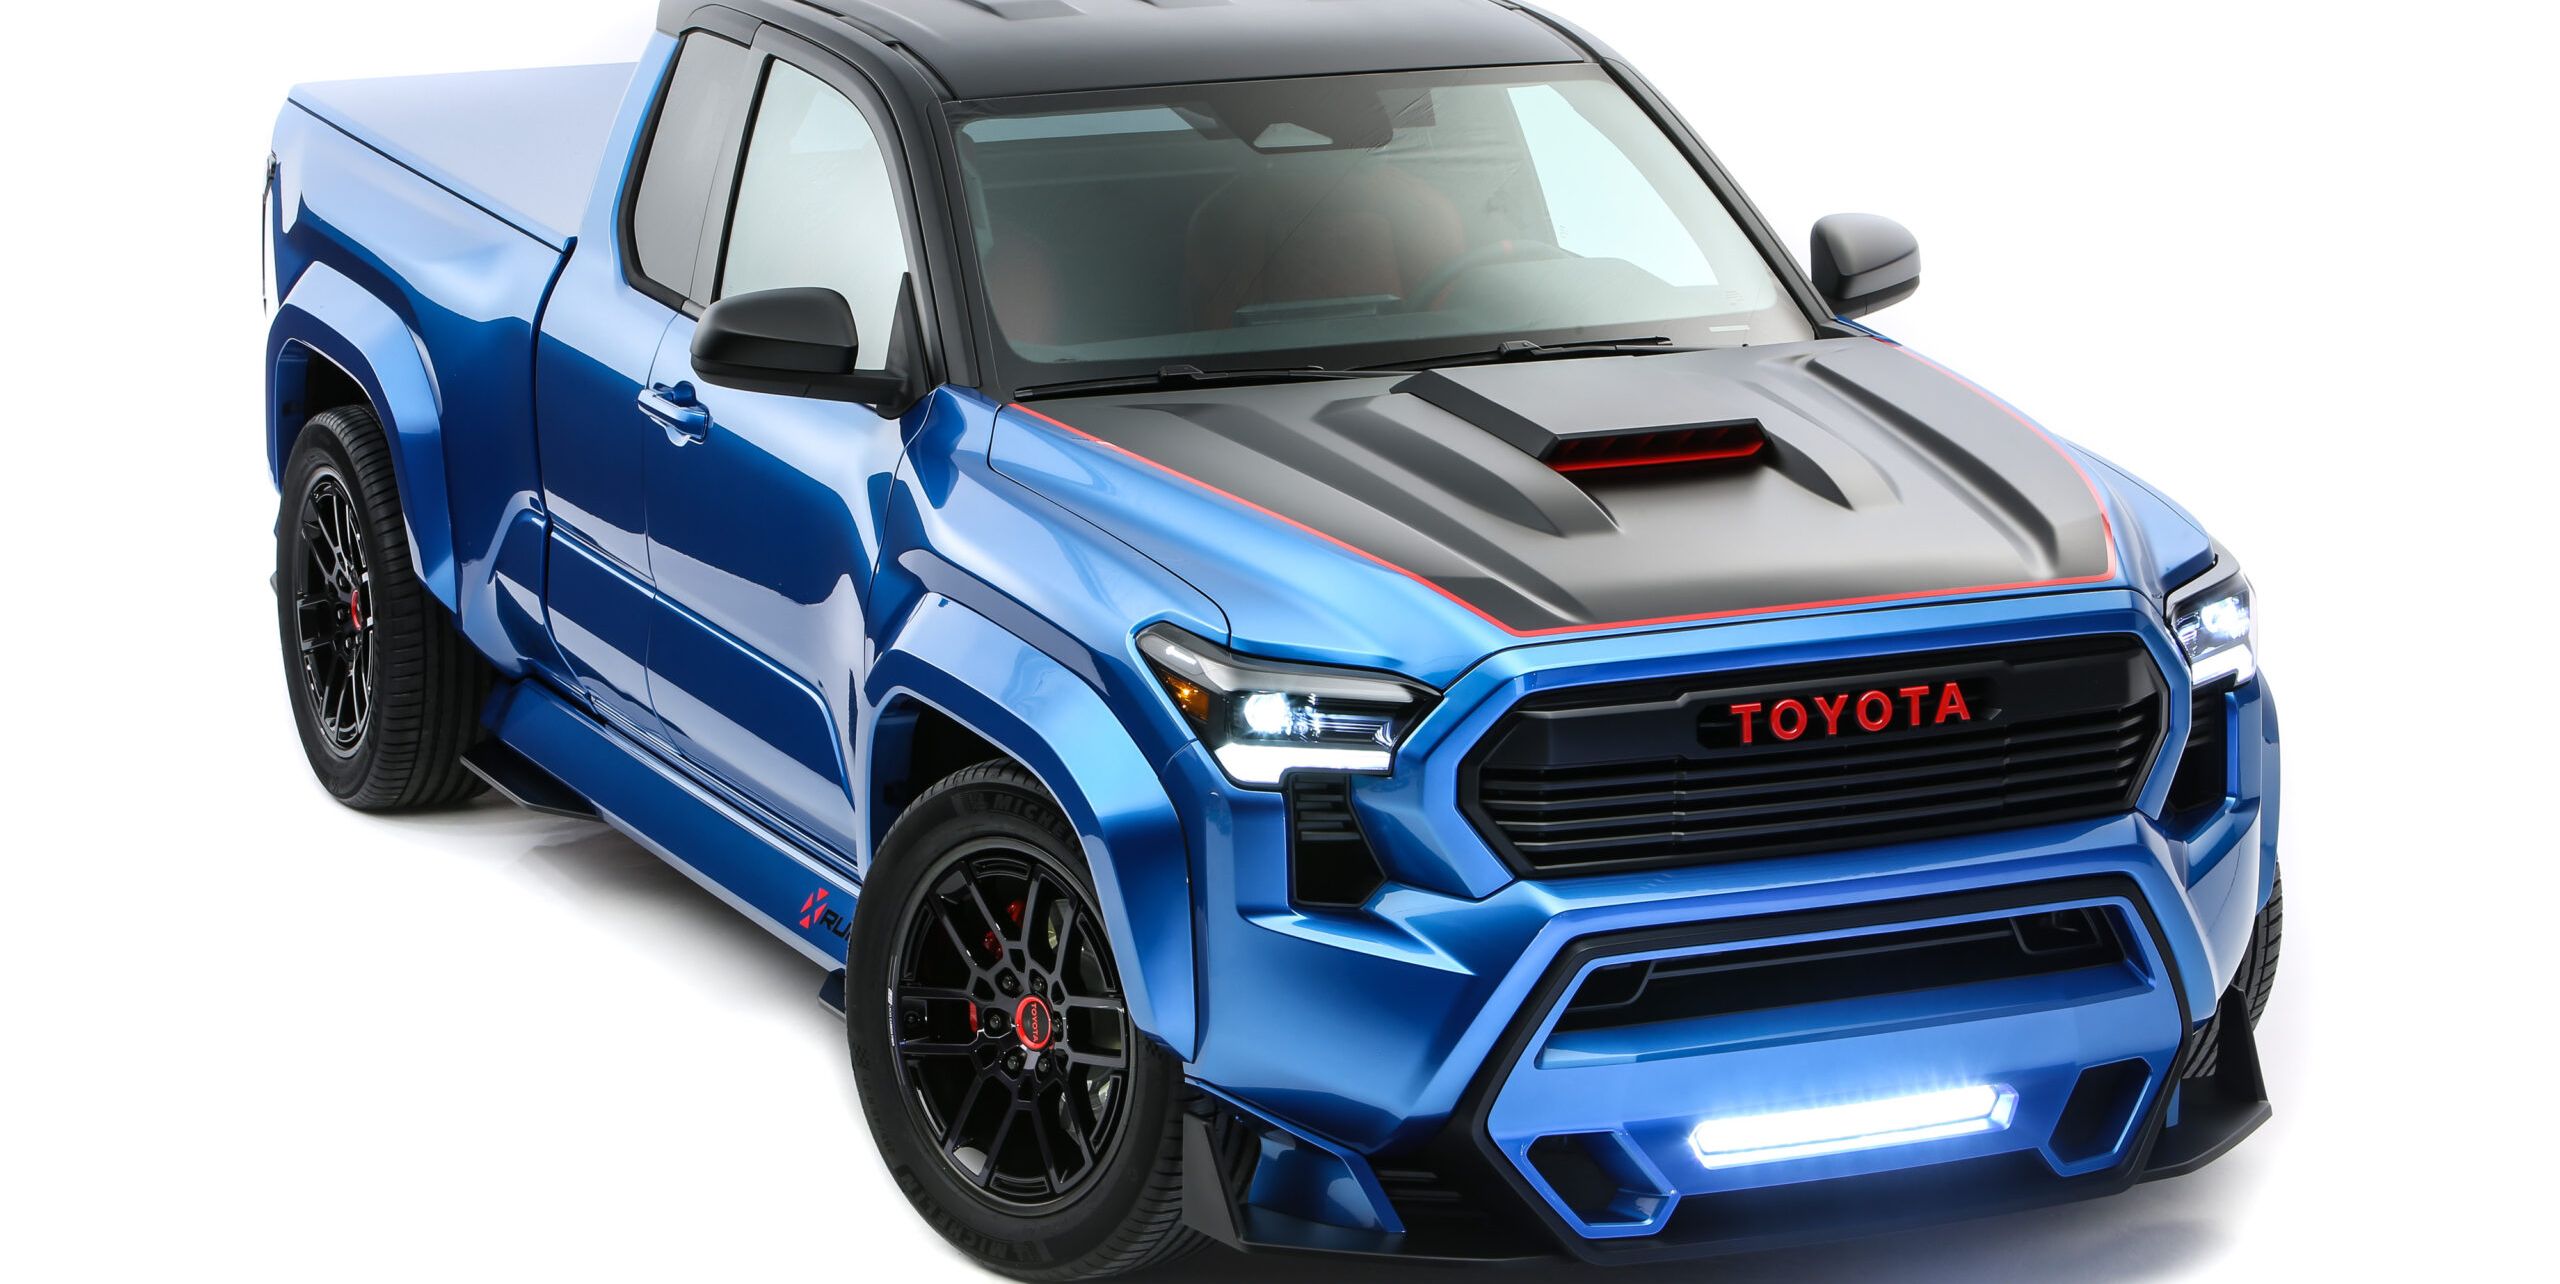 Toyota Tacoma X-Runner Concept Is Our Kind of Street Truck